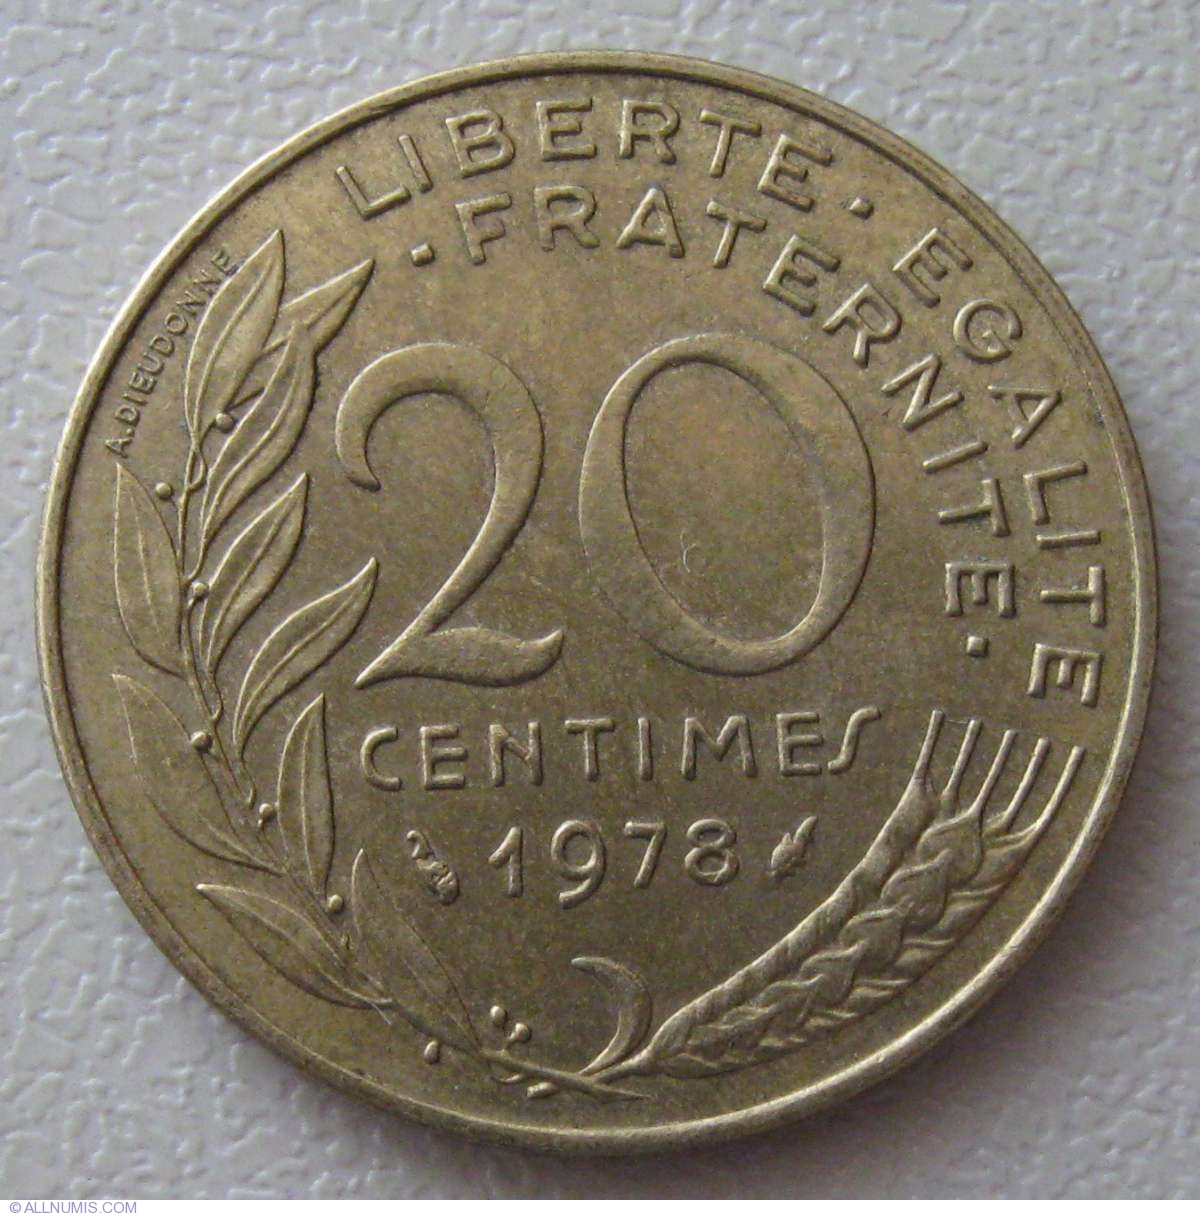 20 Centimes 1978, Fifth Republic (1971-1985) - France - Coin - 968